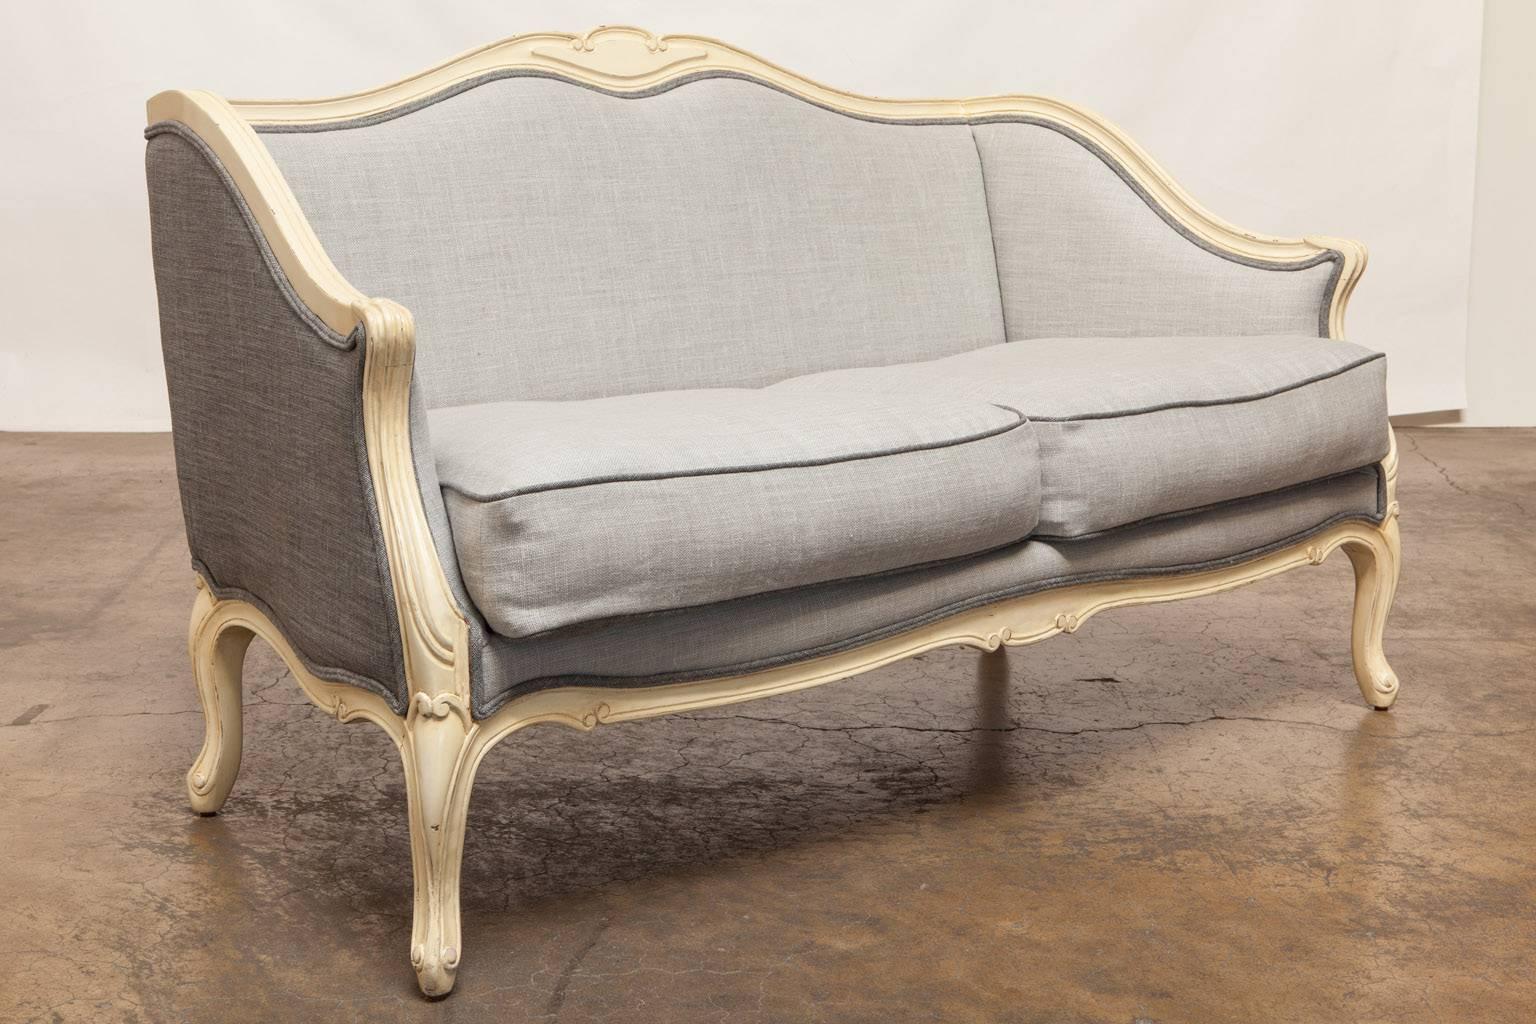 Fantastic pair of matching French Louis XV style painted walnut settees featuring a new two-tone French organic linen upholstery. The back of the settees has a darker gray linen used as an accent to the front with a double welt border all around as